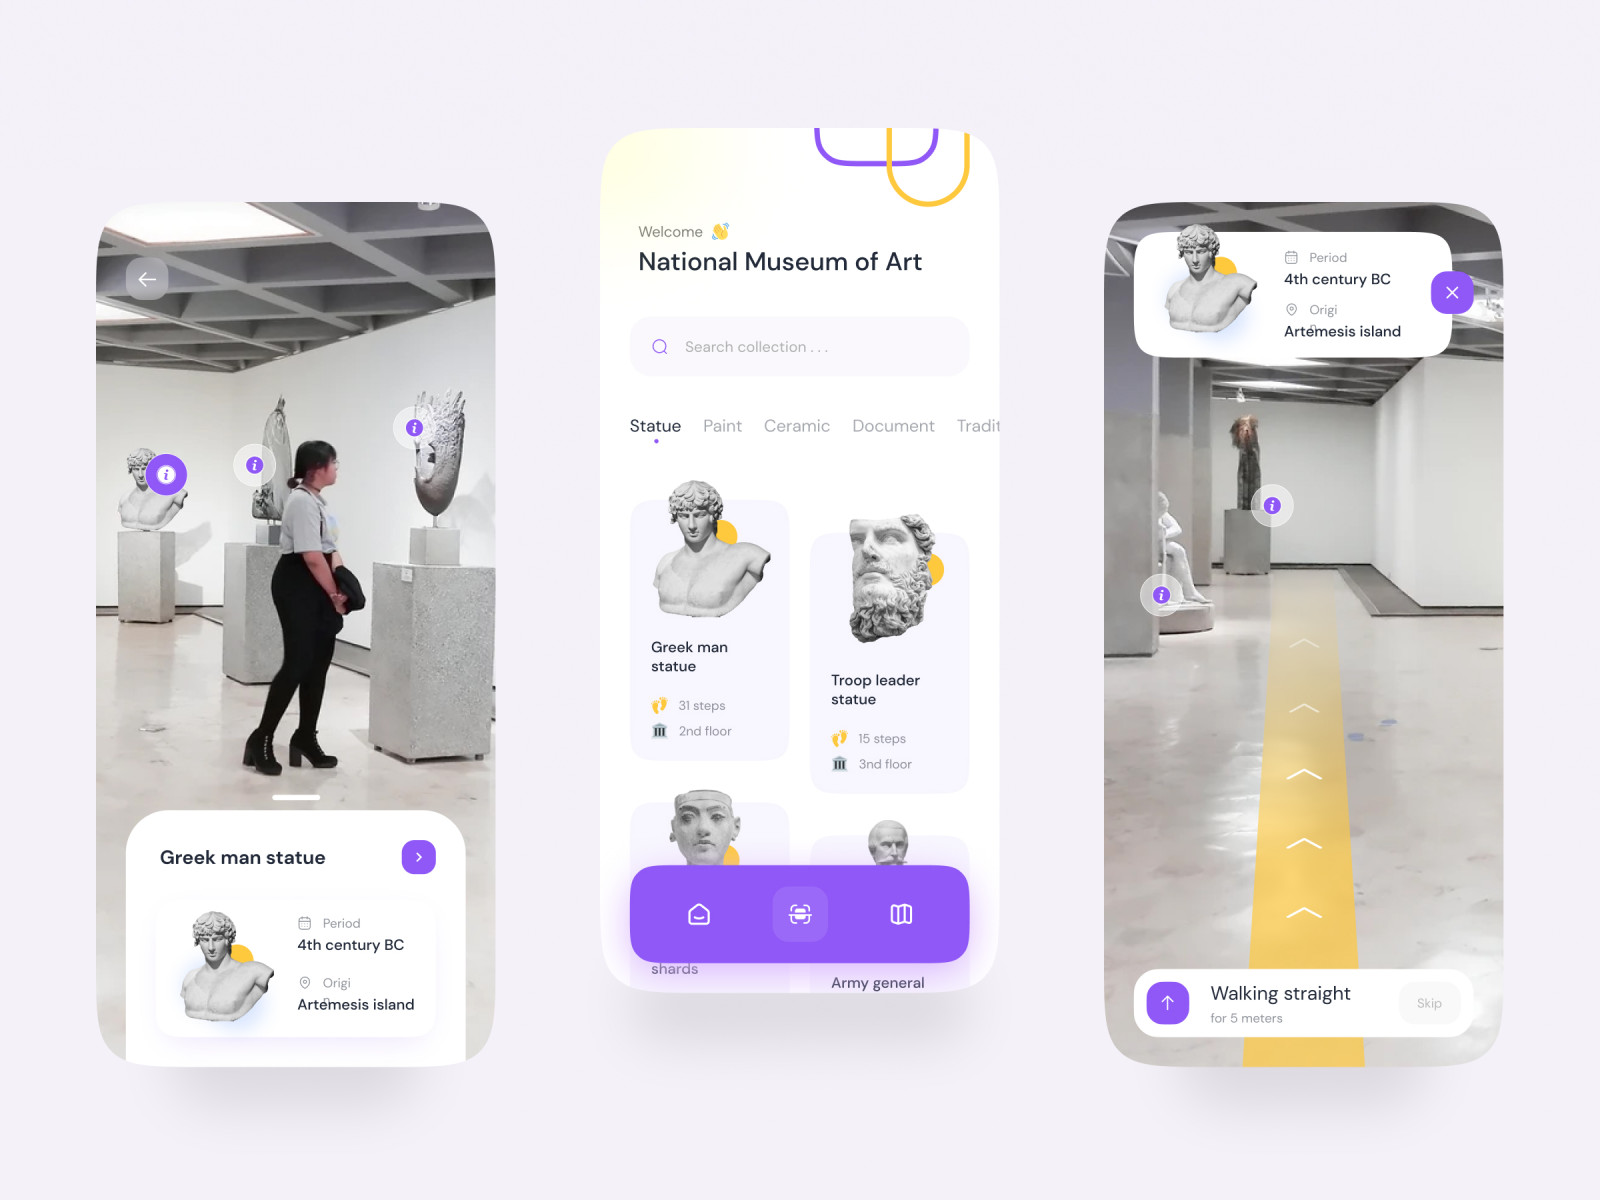 AR is a UI/UX design trend